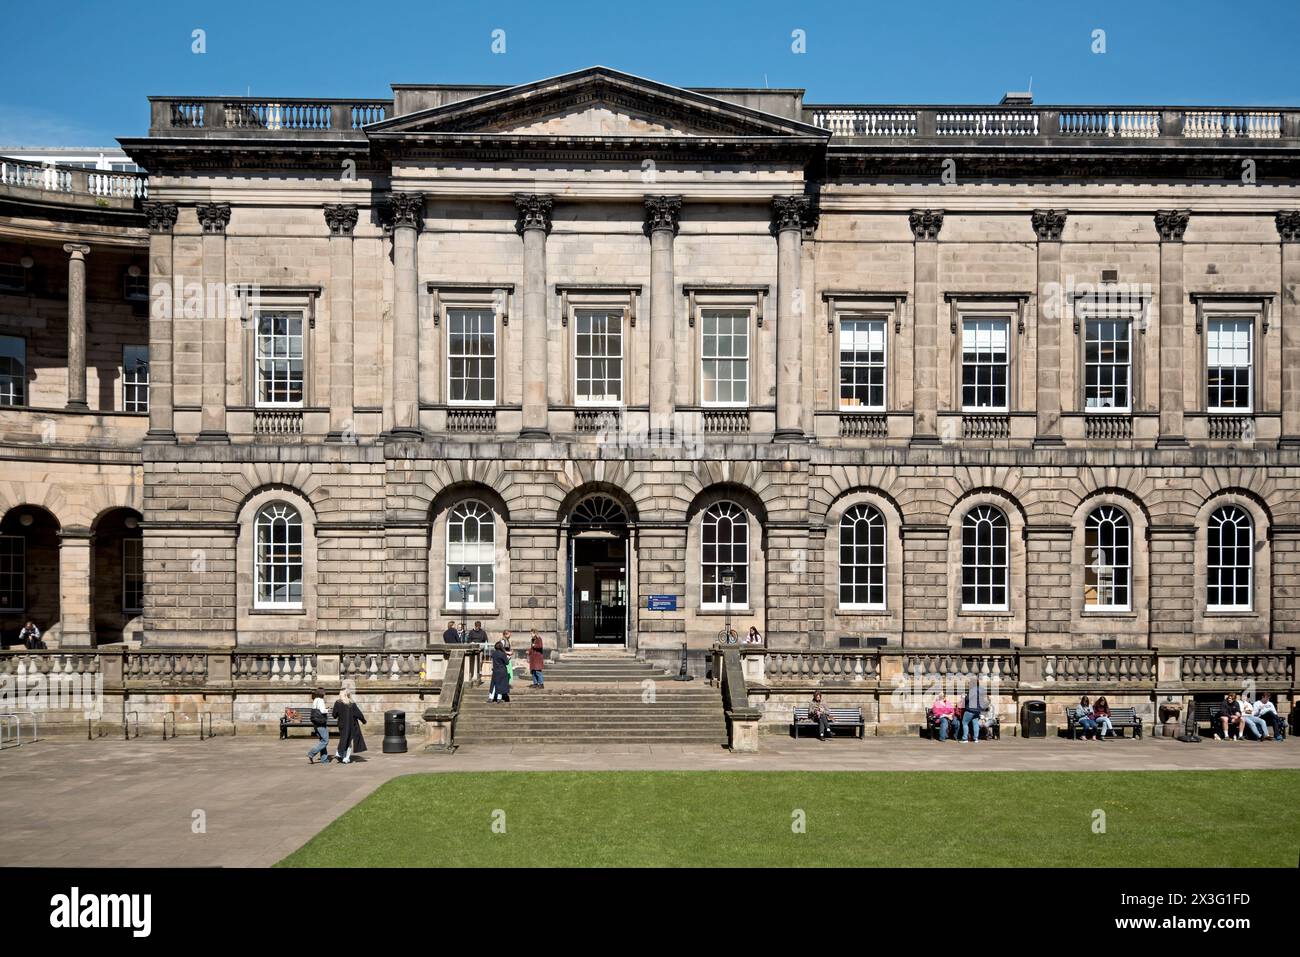 Facade of Old College, housing the University of Edinburgh's School of Law. Designed by Robert Adam and completed by William Henry Playfair in 1827. Stock Photo